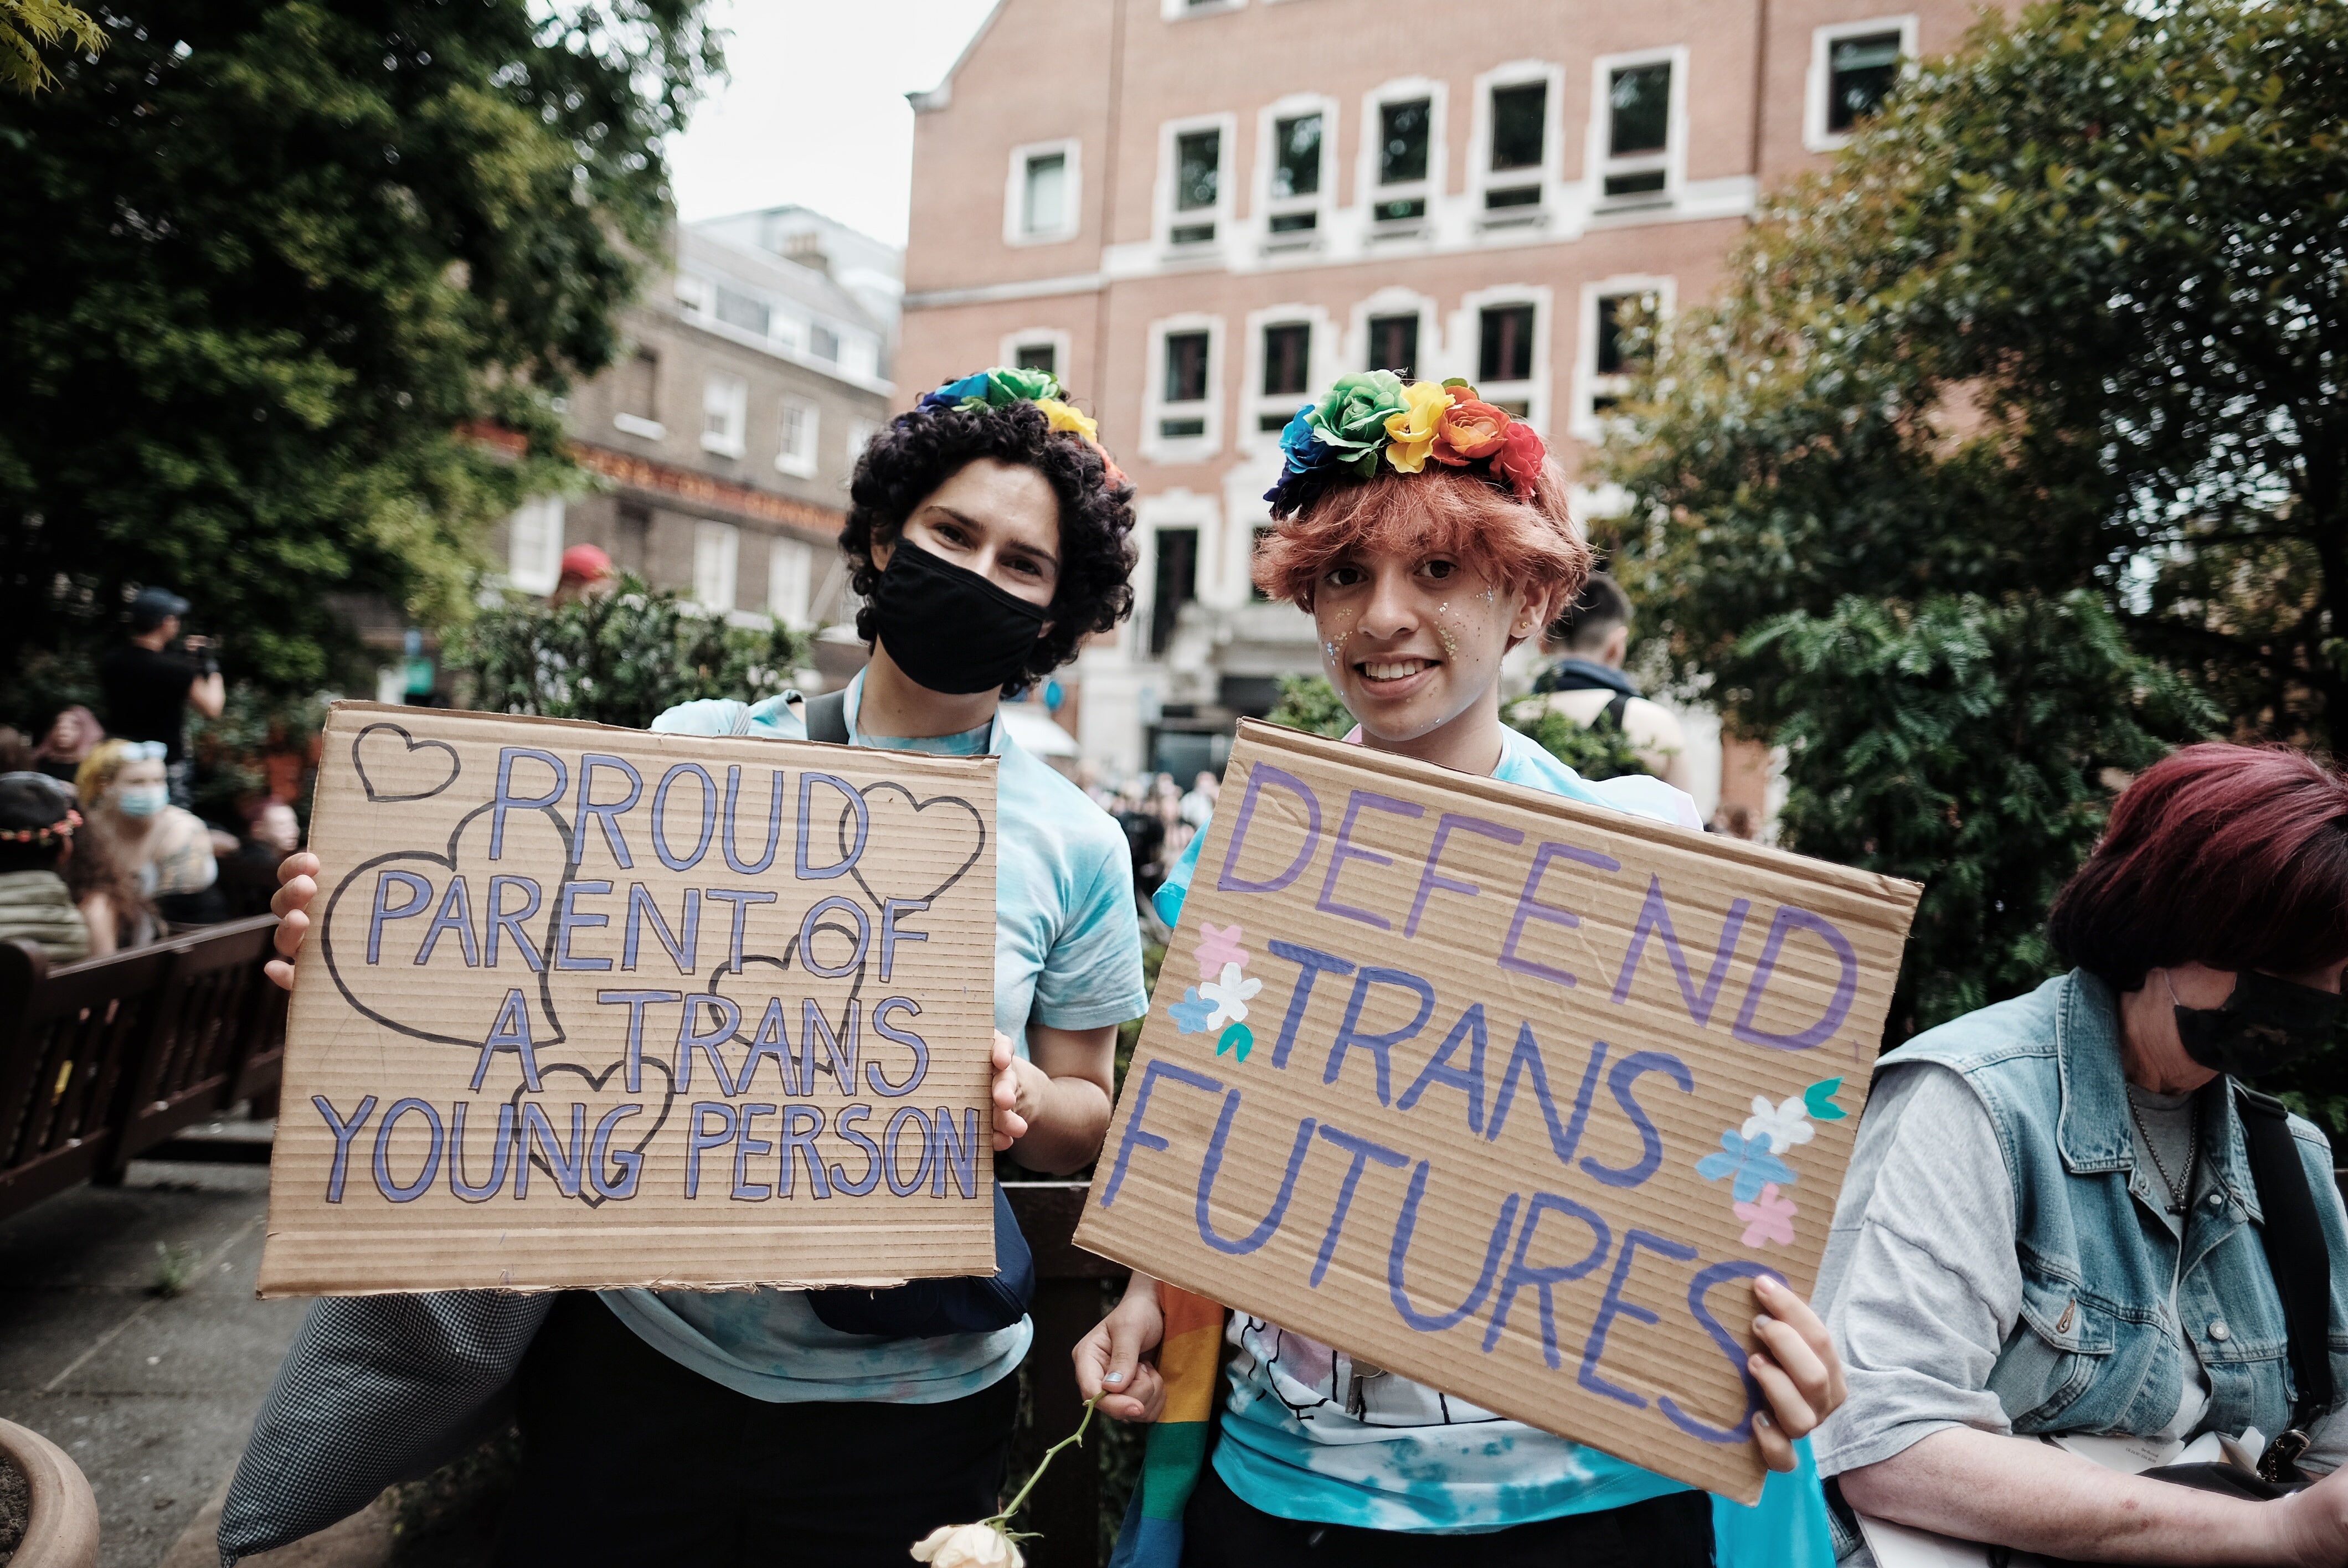 Trans Pride in London is a day to celebrate trans lives and protest against transphobia, discrimination and hate crimes against the trans community